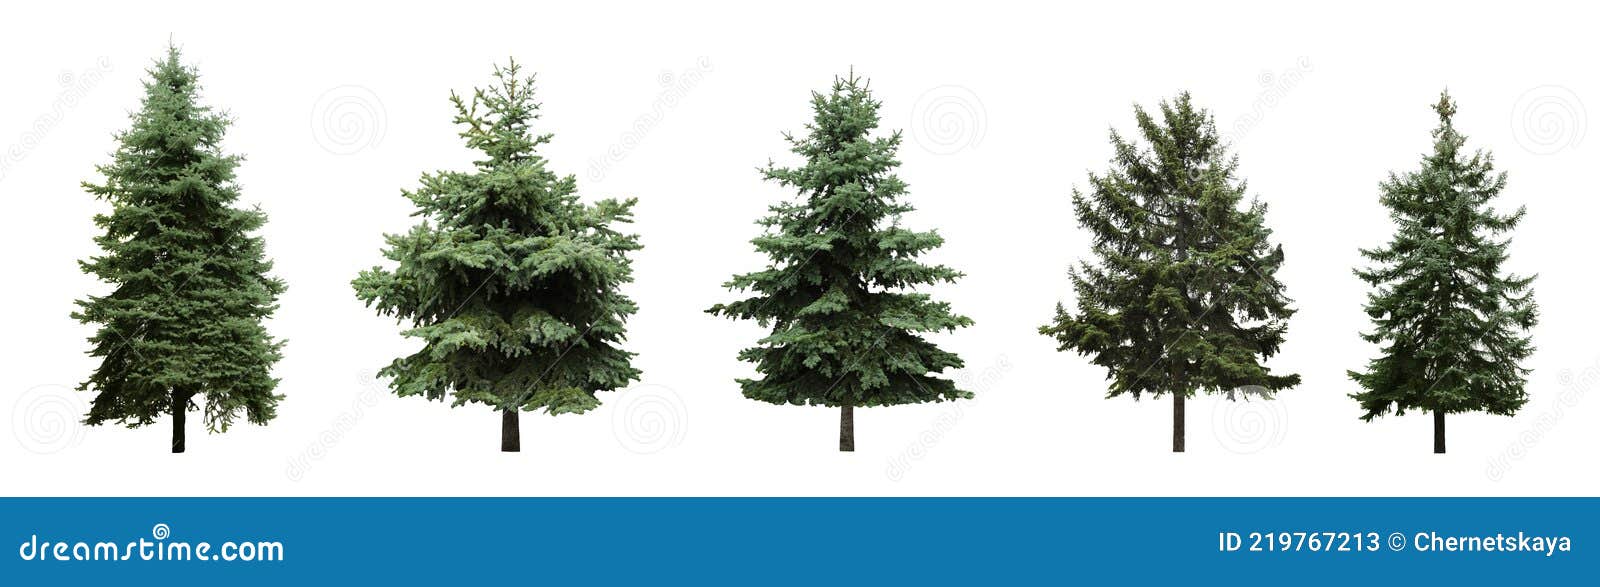 beautiful evergreen fir trees on white background, collage. banner 